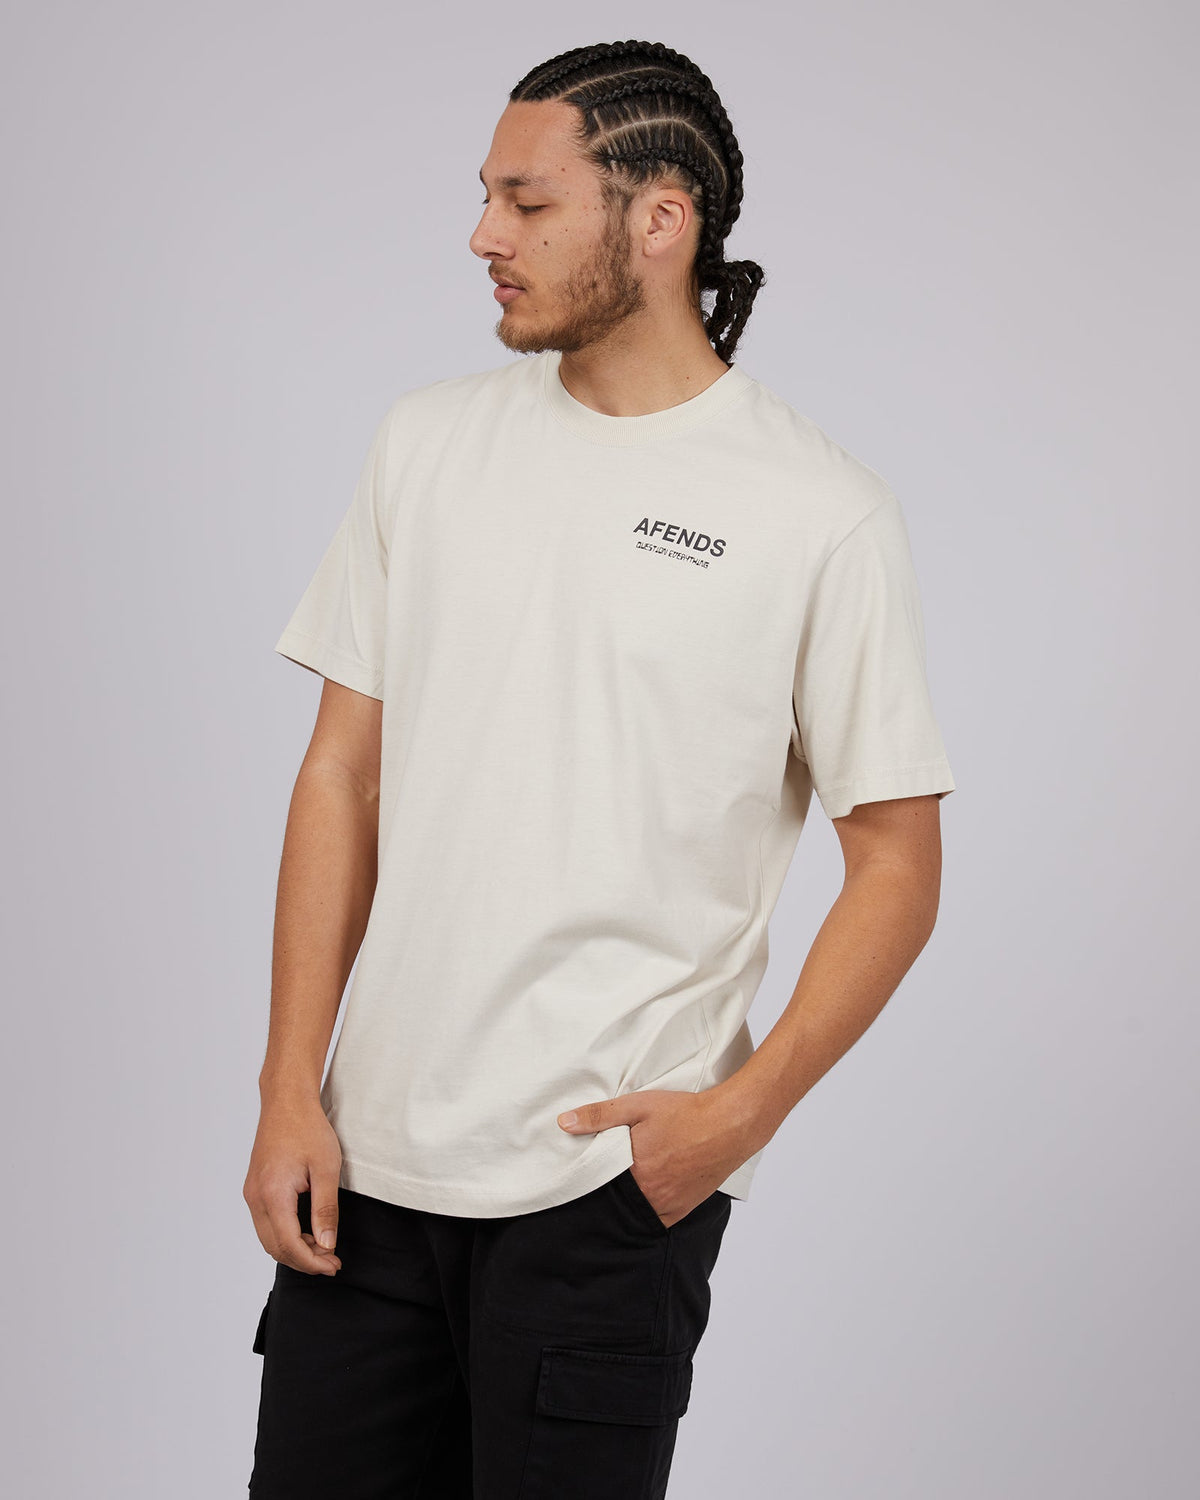 Afends-Aveform Recycled Retro Fit Tee Moonbeam-Edge Clothing